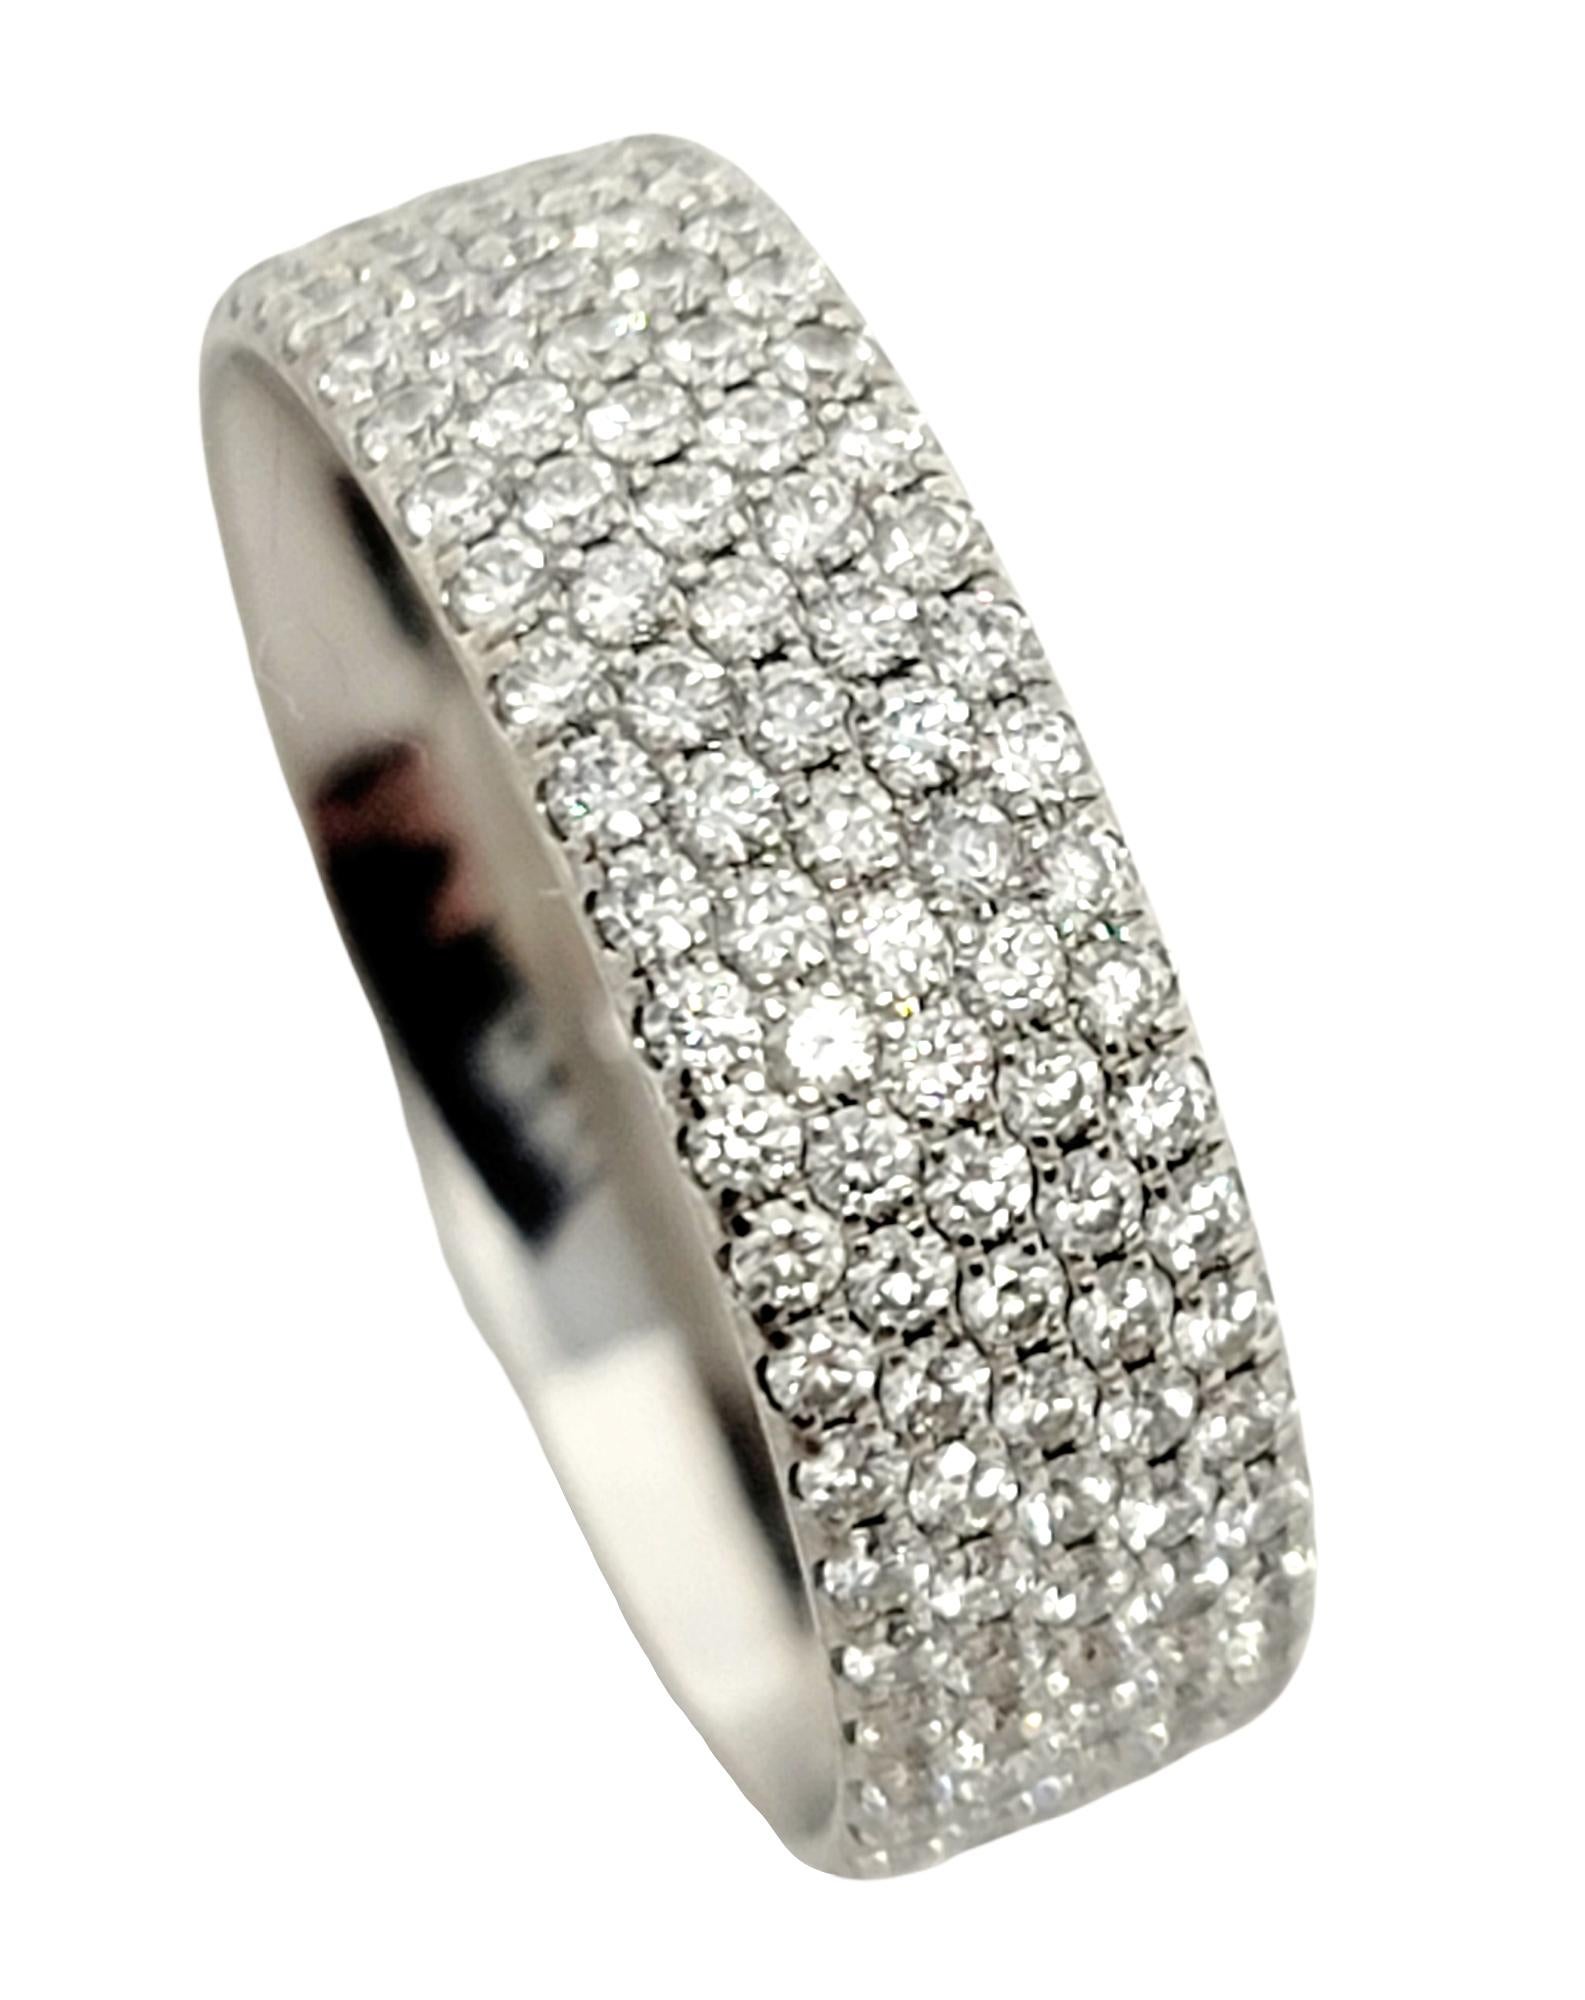 Ring size: 4.5

Sleek and modern diamond eternity band ring from the Tiffany & Co. 'Metro' collection. This gorgeous ring features .85 carats of bright, icy white pave diamonds set in 5 rows in a highly polished 18 karat white gold setting. The